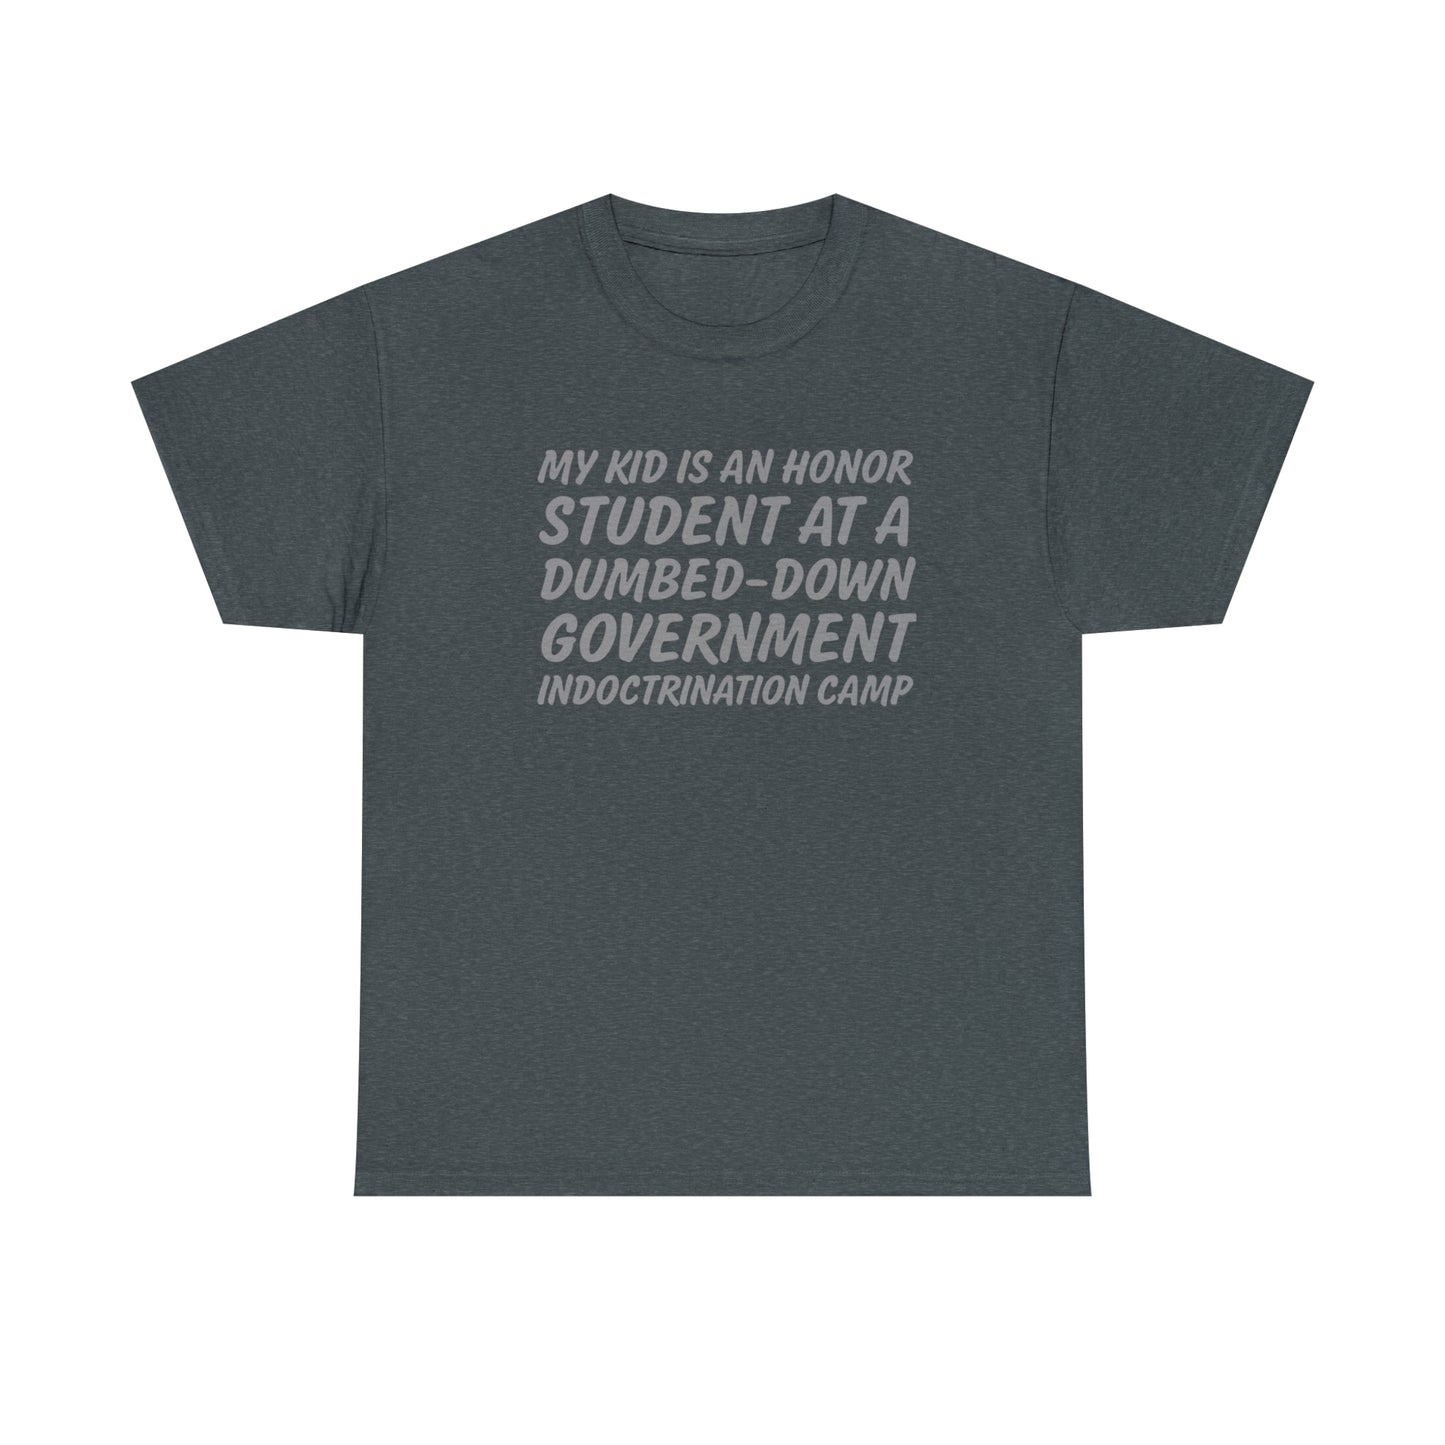 Honor Student T-Shirt For Conservative TShirt For Indoctrination Camp T Shirt For Dumb Down Shirt For Parent TShirt